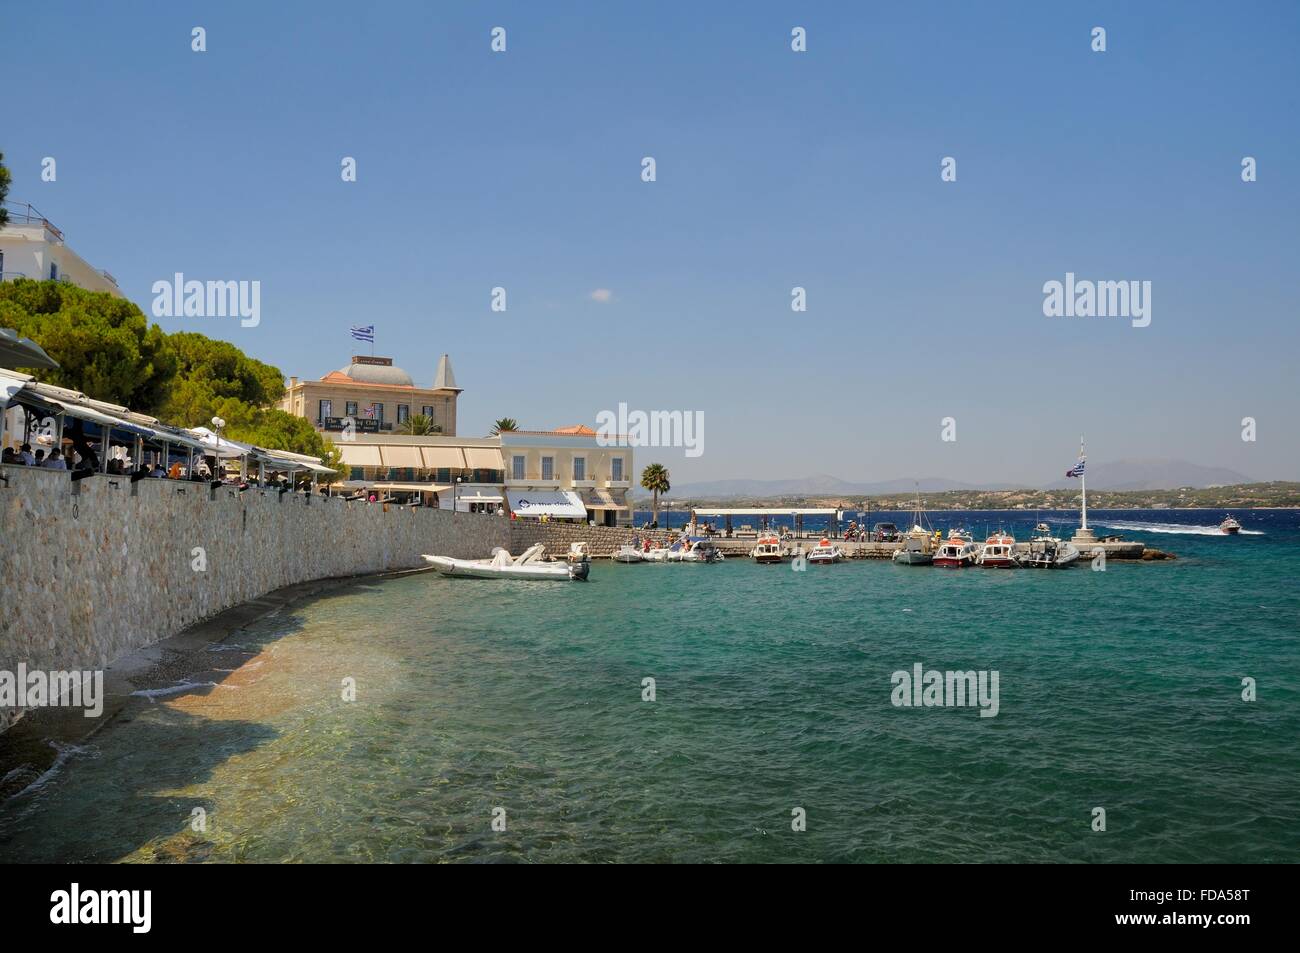 Spetses town seafront, Spetses, Saronic Islands, Attica, Peloponnese, Greece. Stock Photo